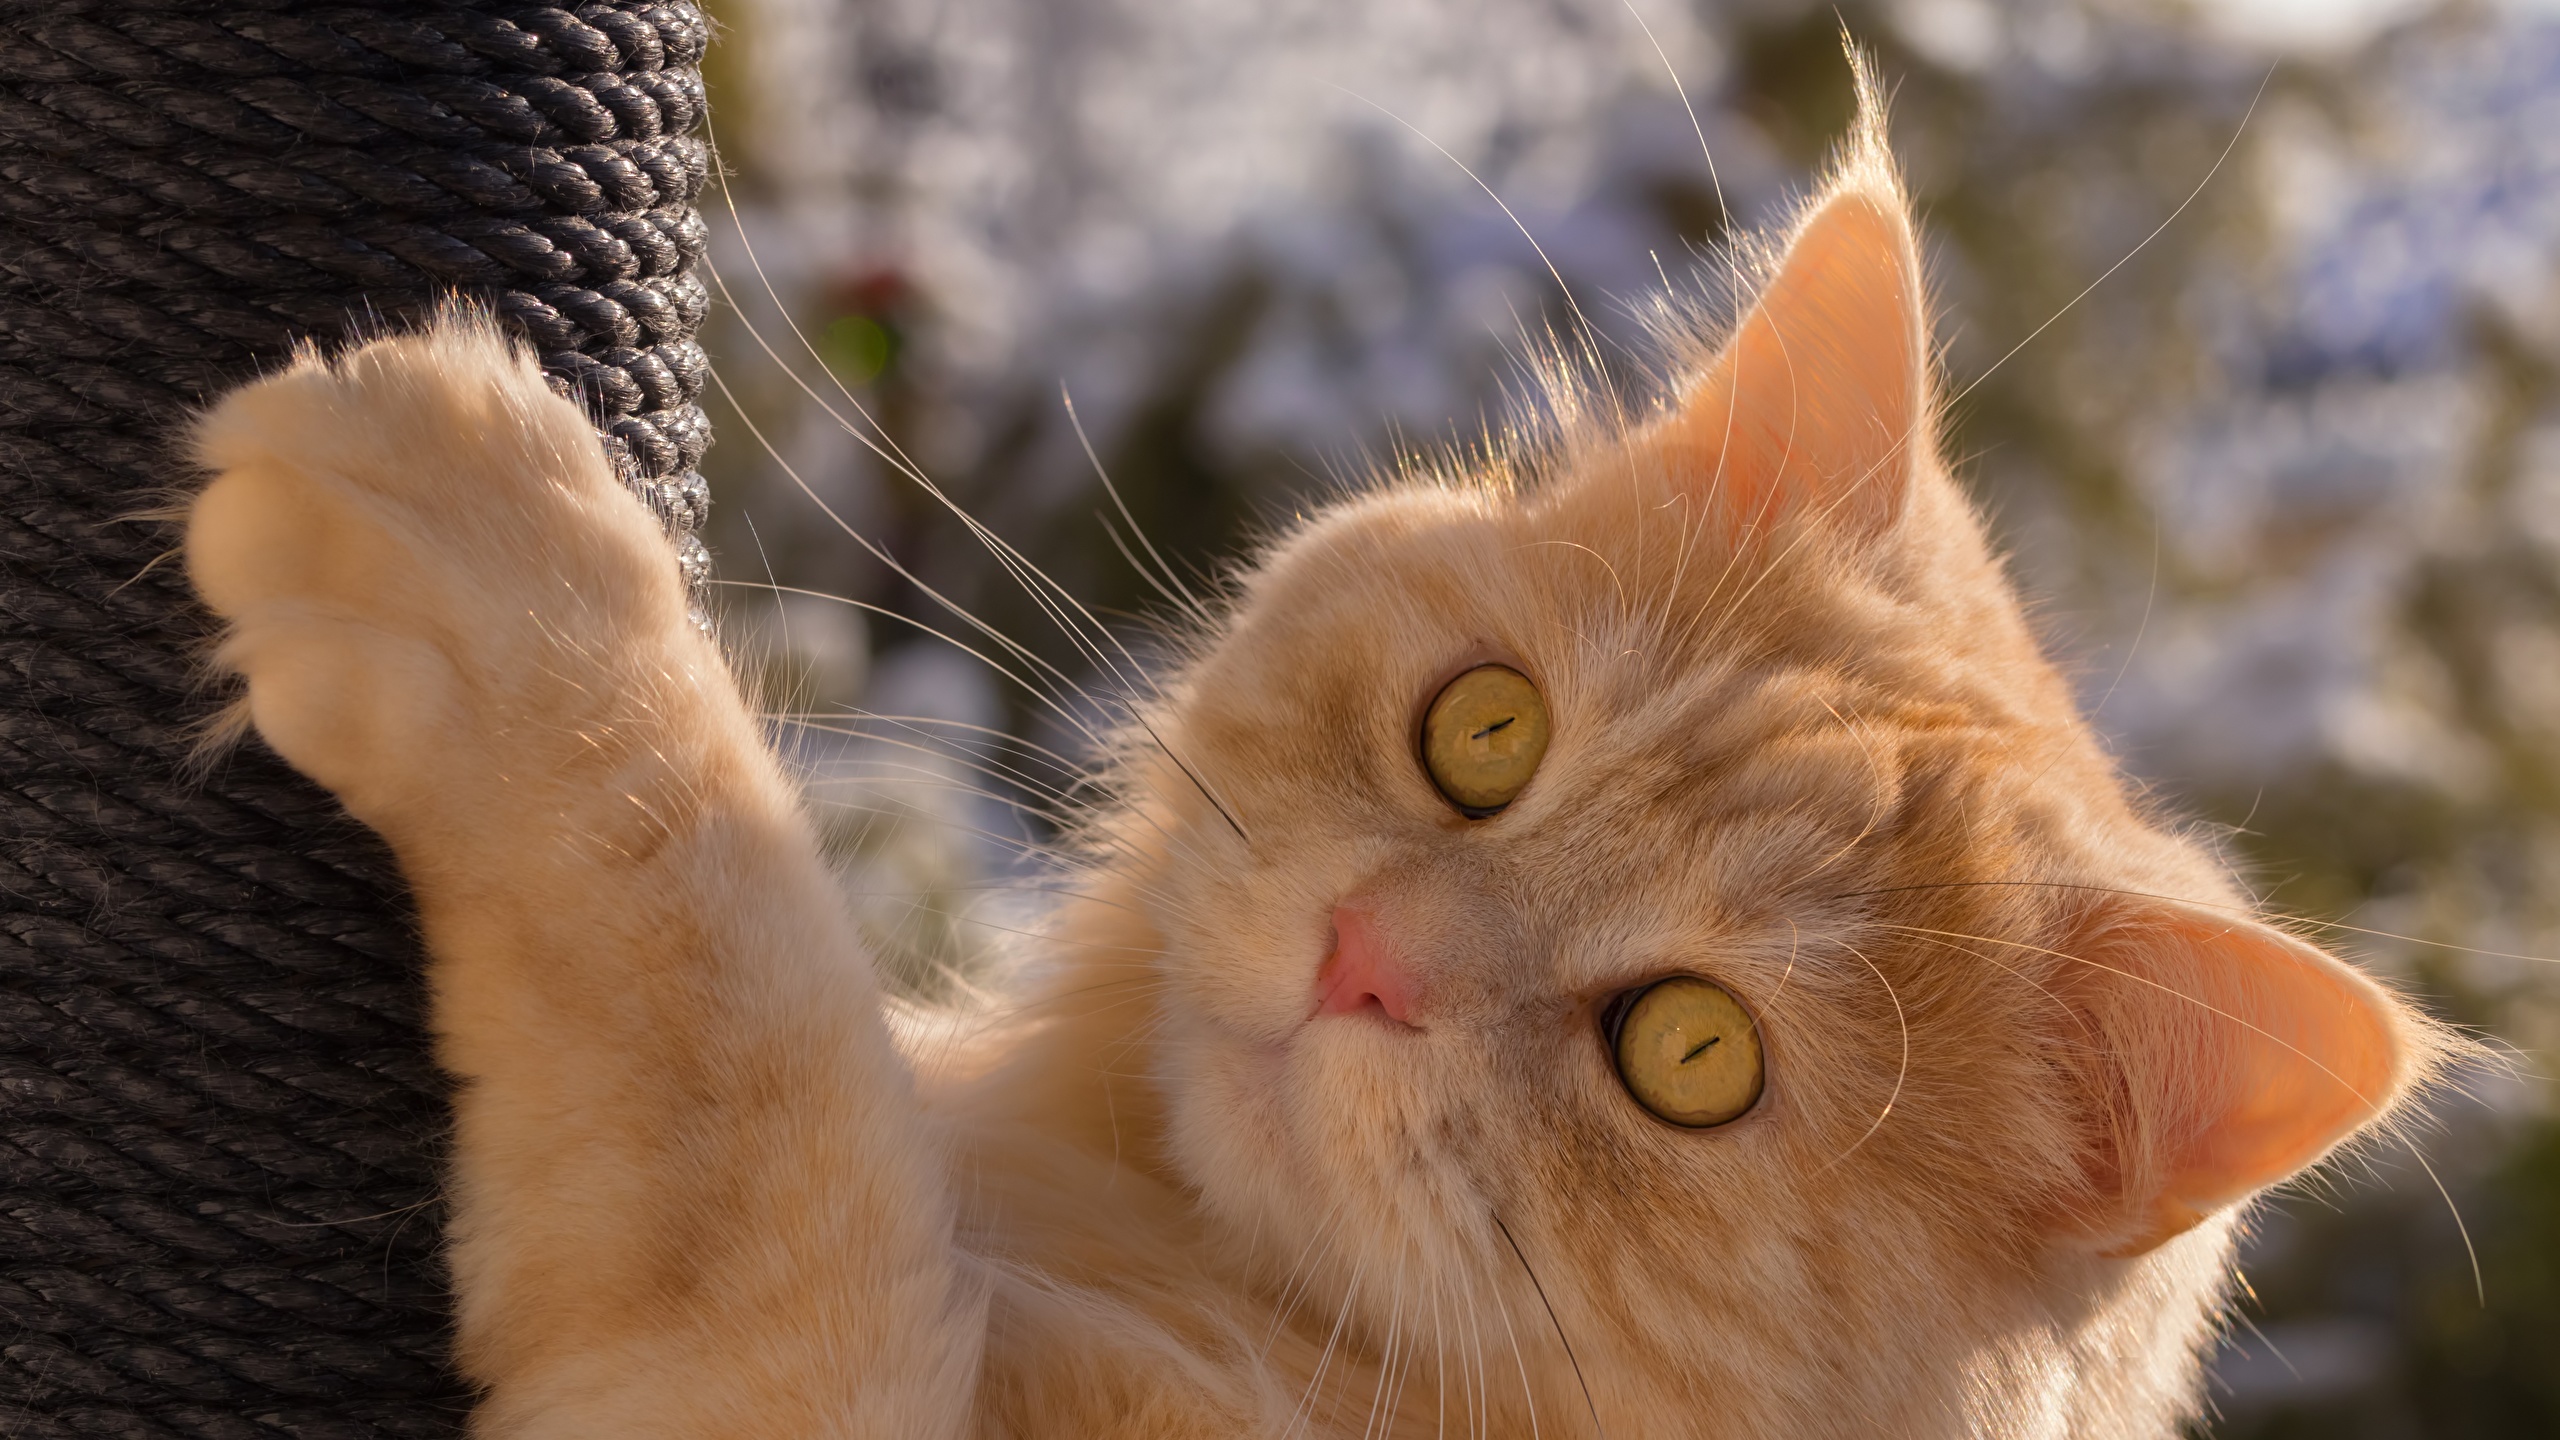 https://s1.1zoom.ru/b4547/187/Cats_Ginger_color_Glance_Paws_533408_2560x1440.jpg